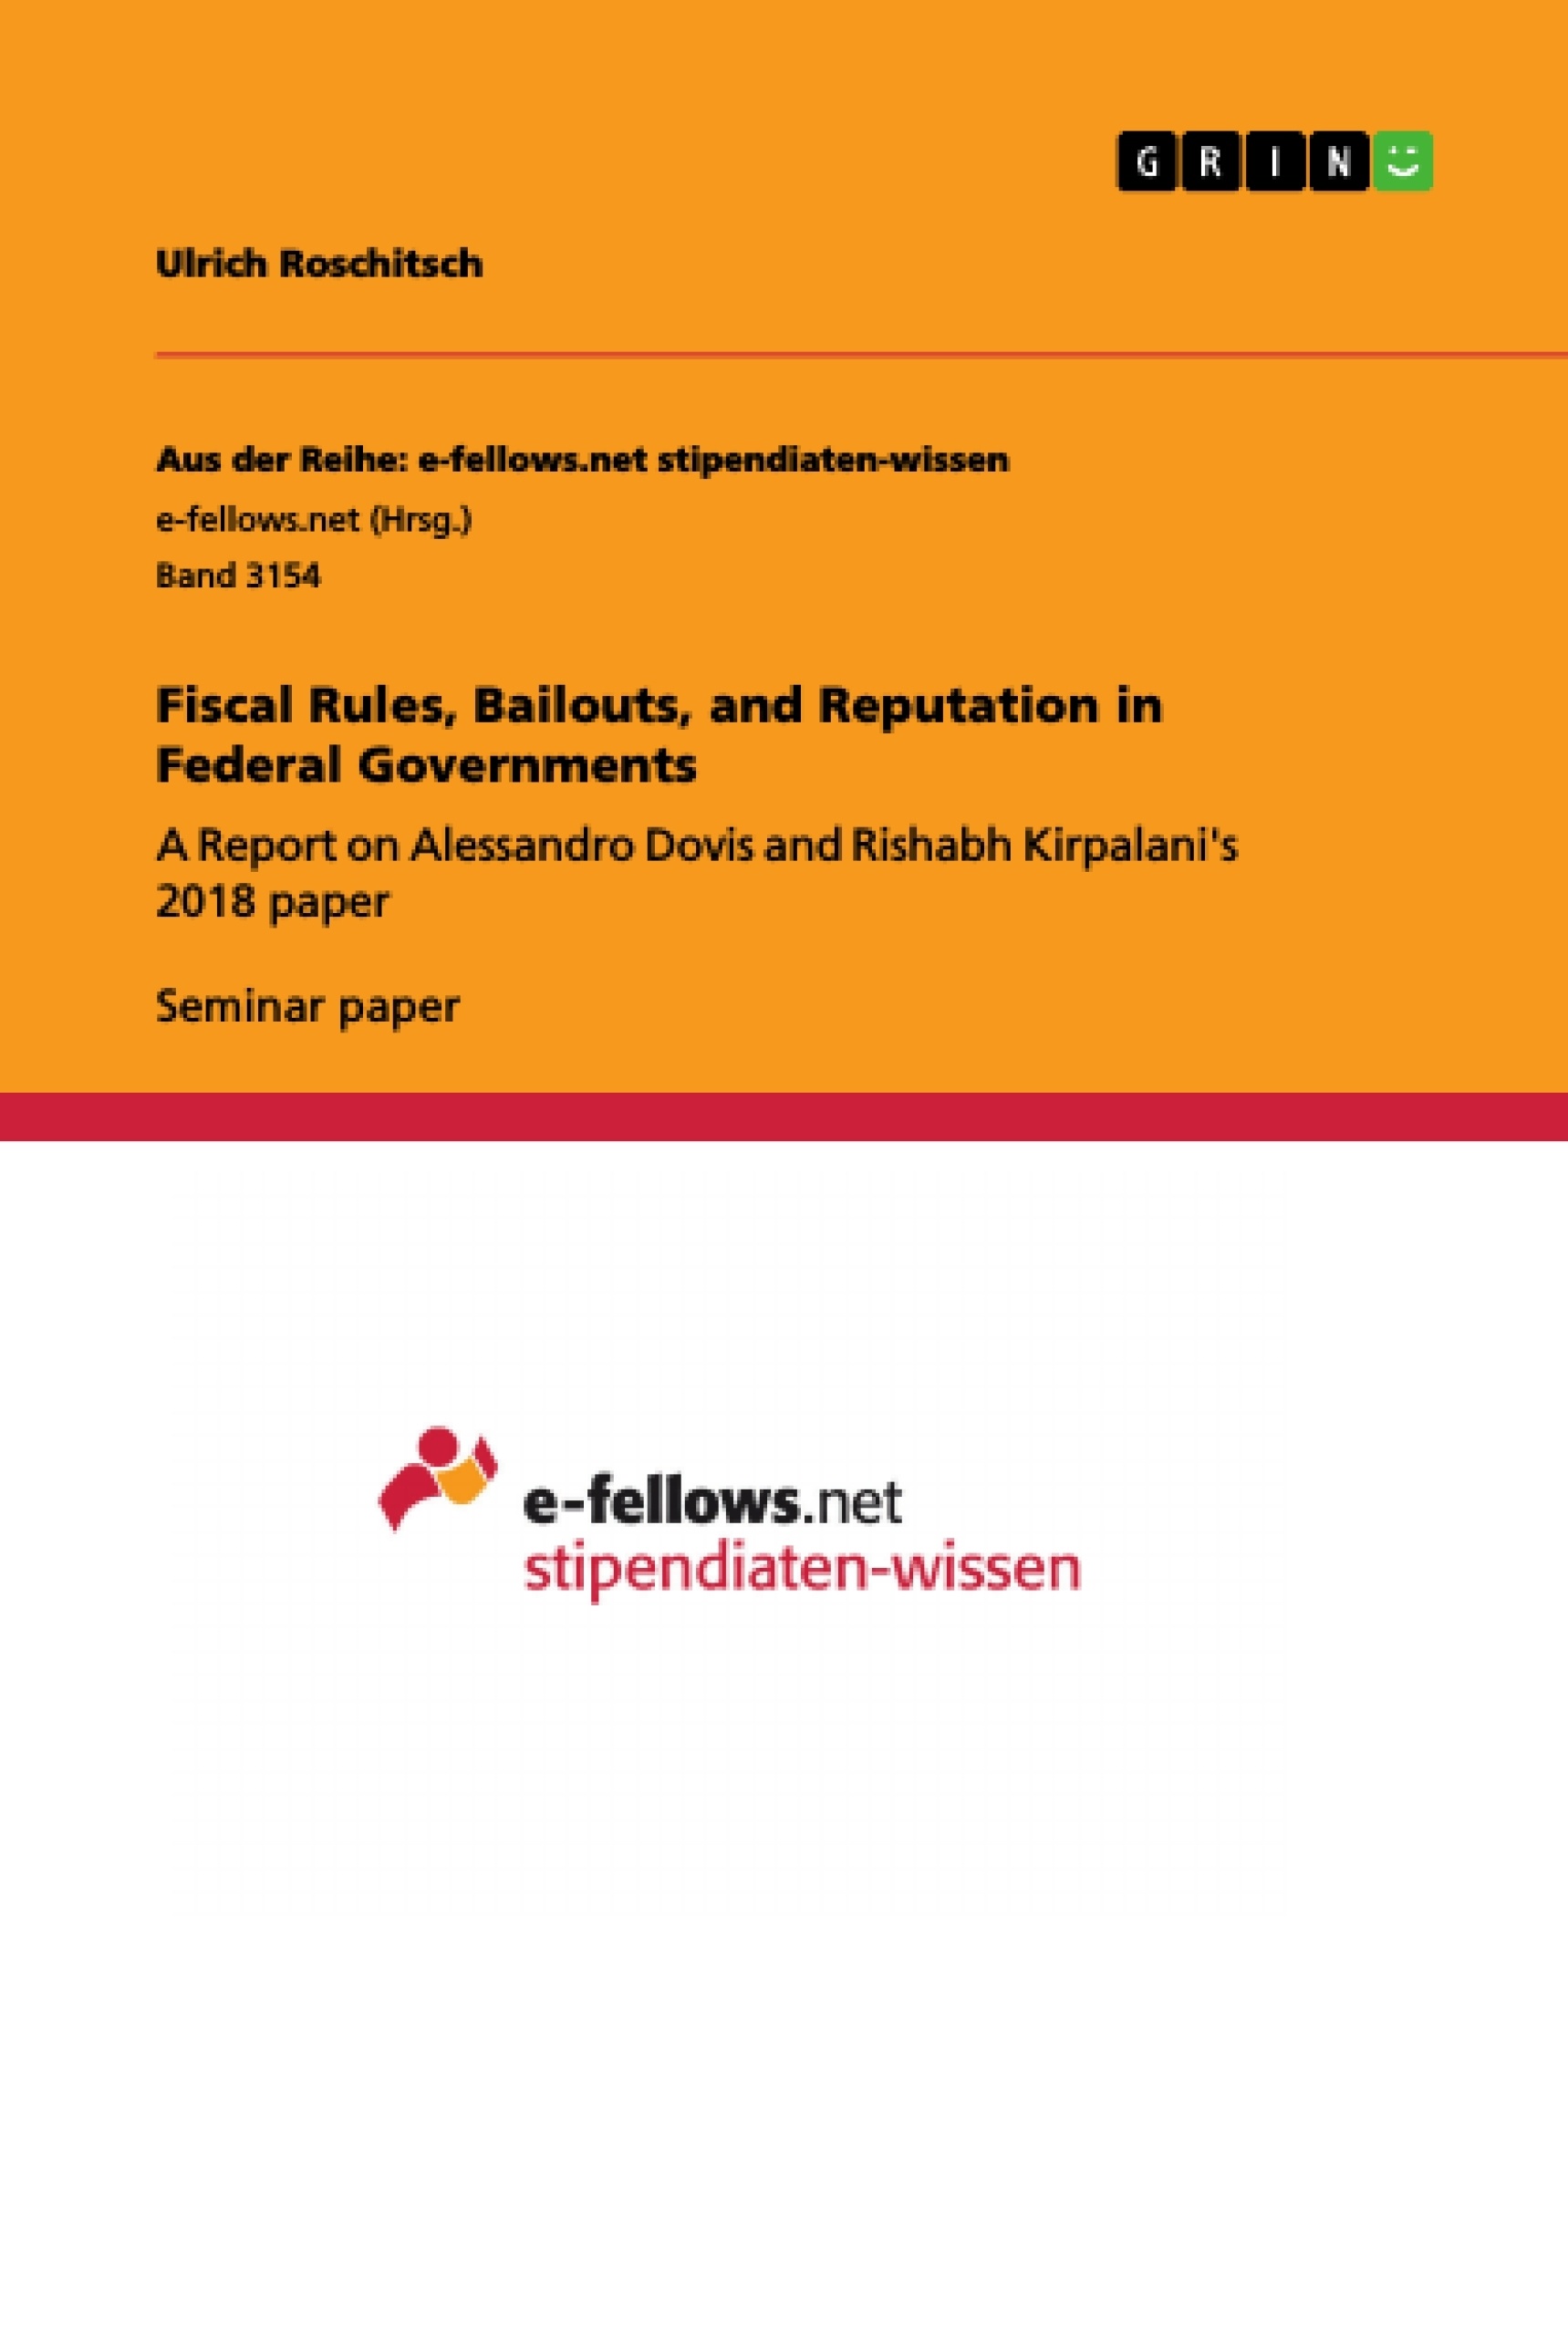 Titre: Fiscal Rules, Bailouts, and Reputation in Federal Governments